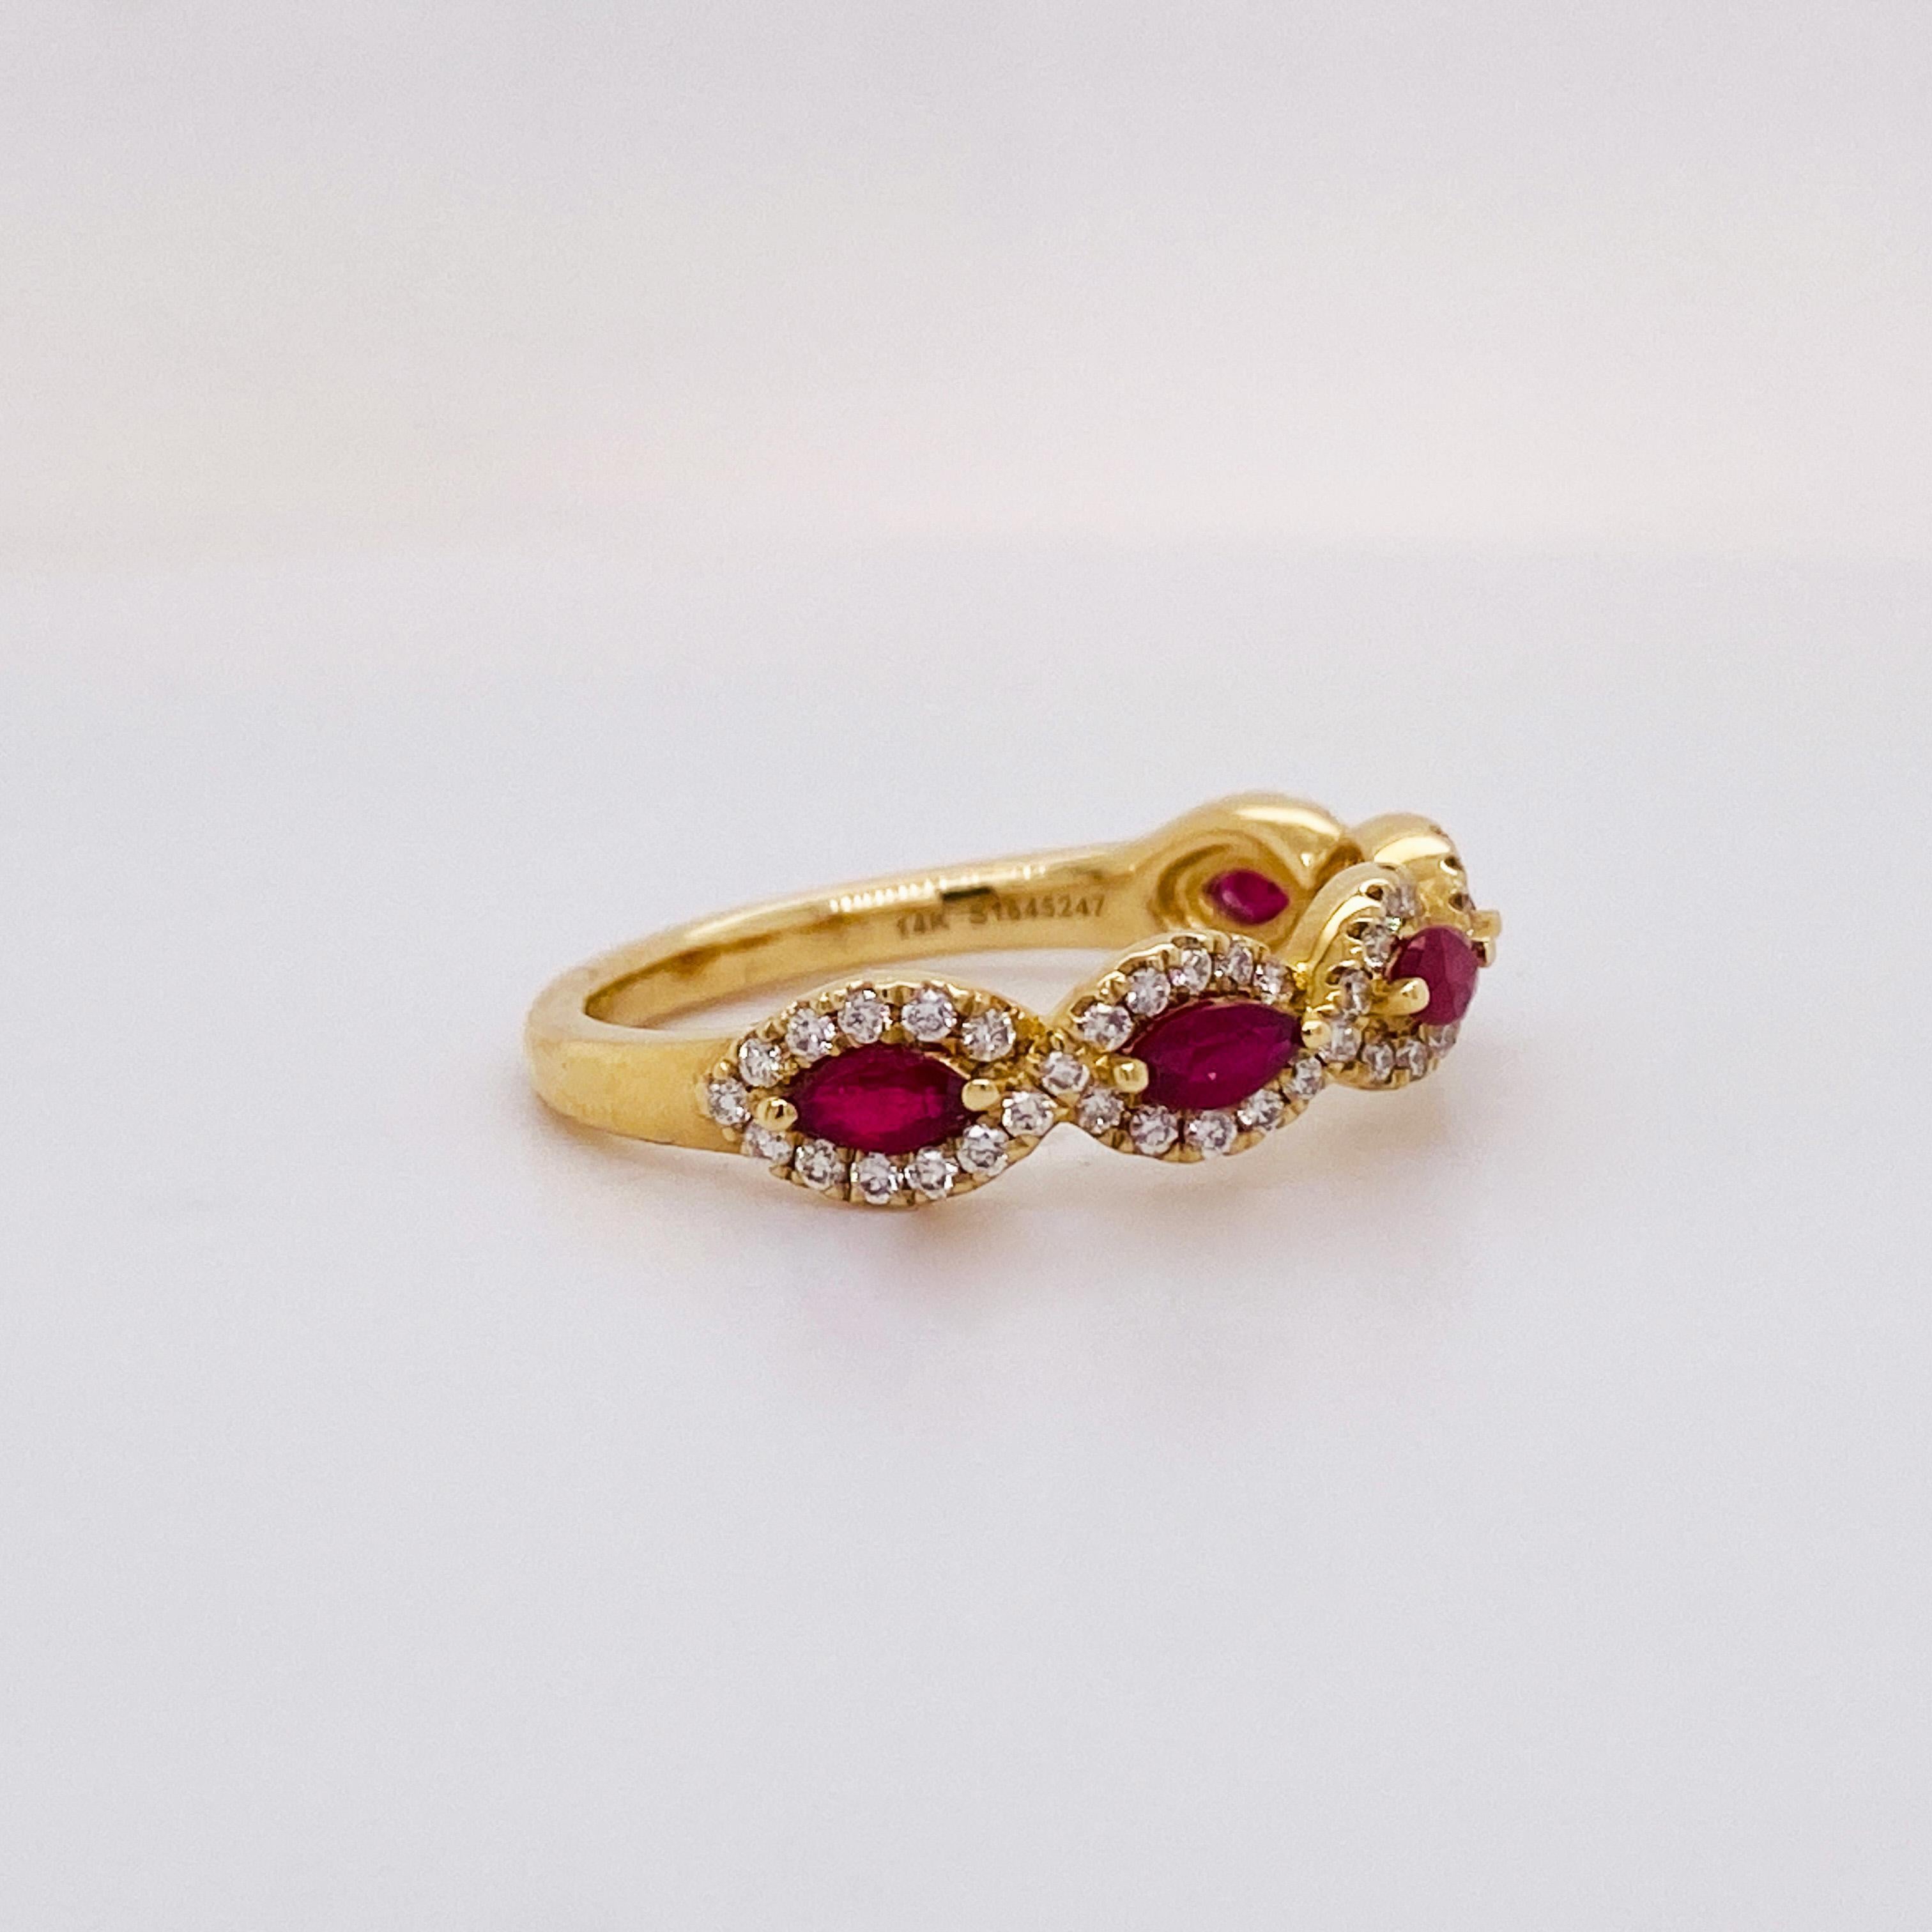 For Sale:  Ruby Marquise Diamond Twist Band in 14K Yellow Gold, 0.76 Carats LR52021 LV 4